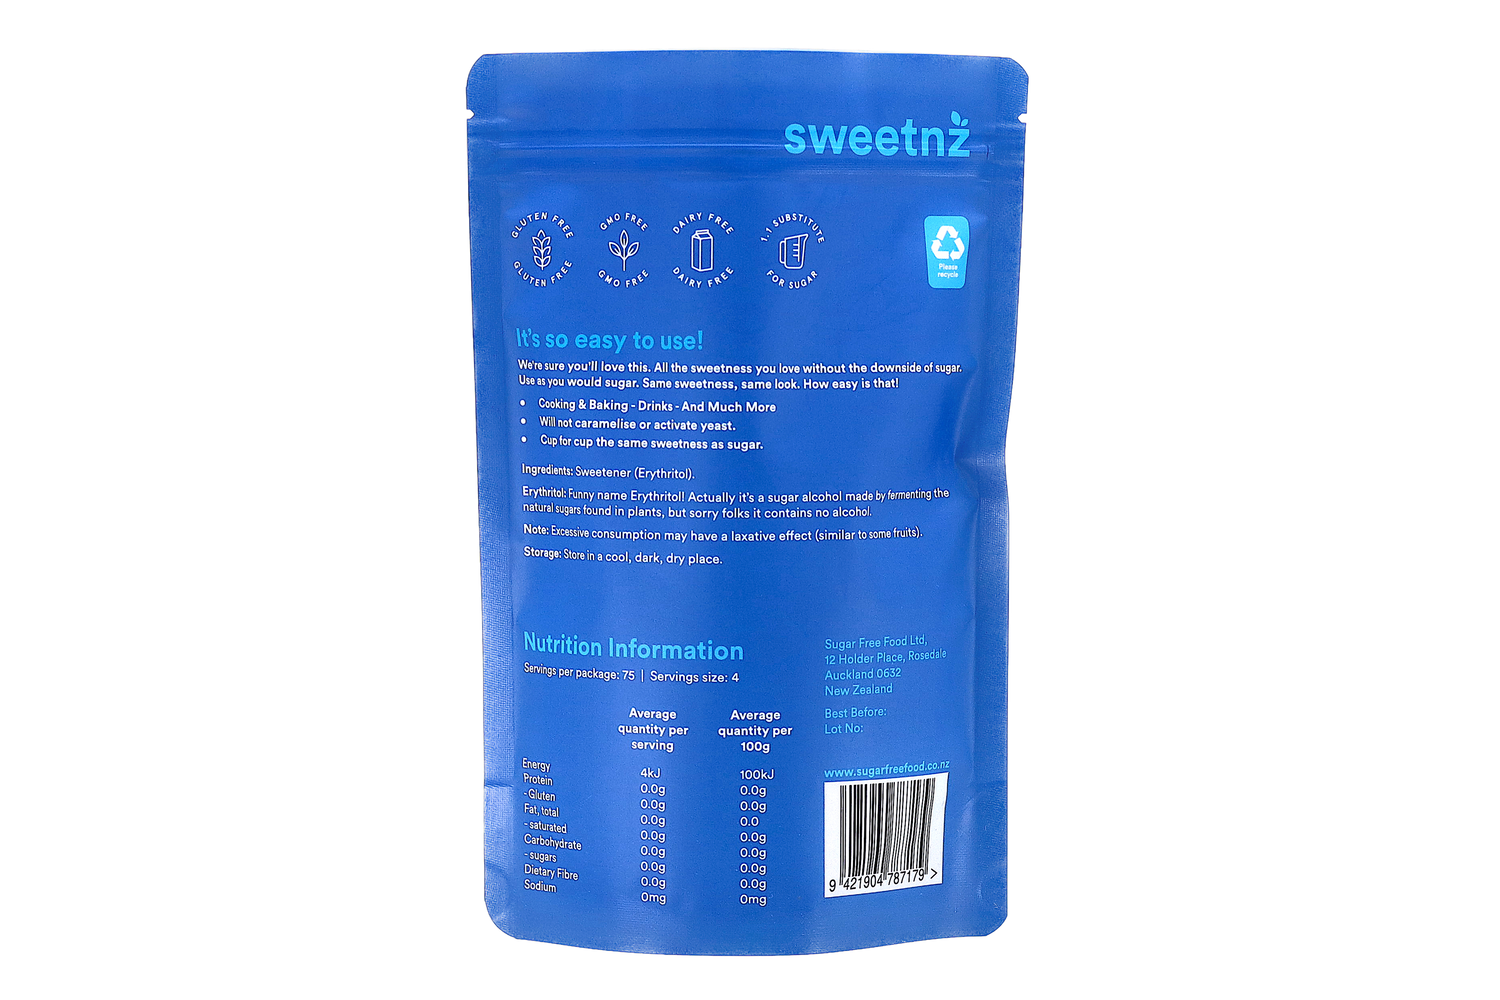 Erythritol 300g back panel. 70% the sweetness of table sugar, but without the calories!